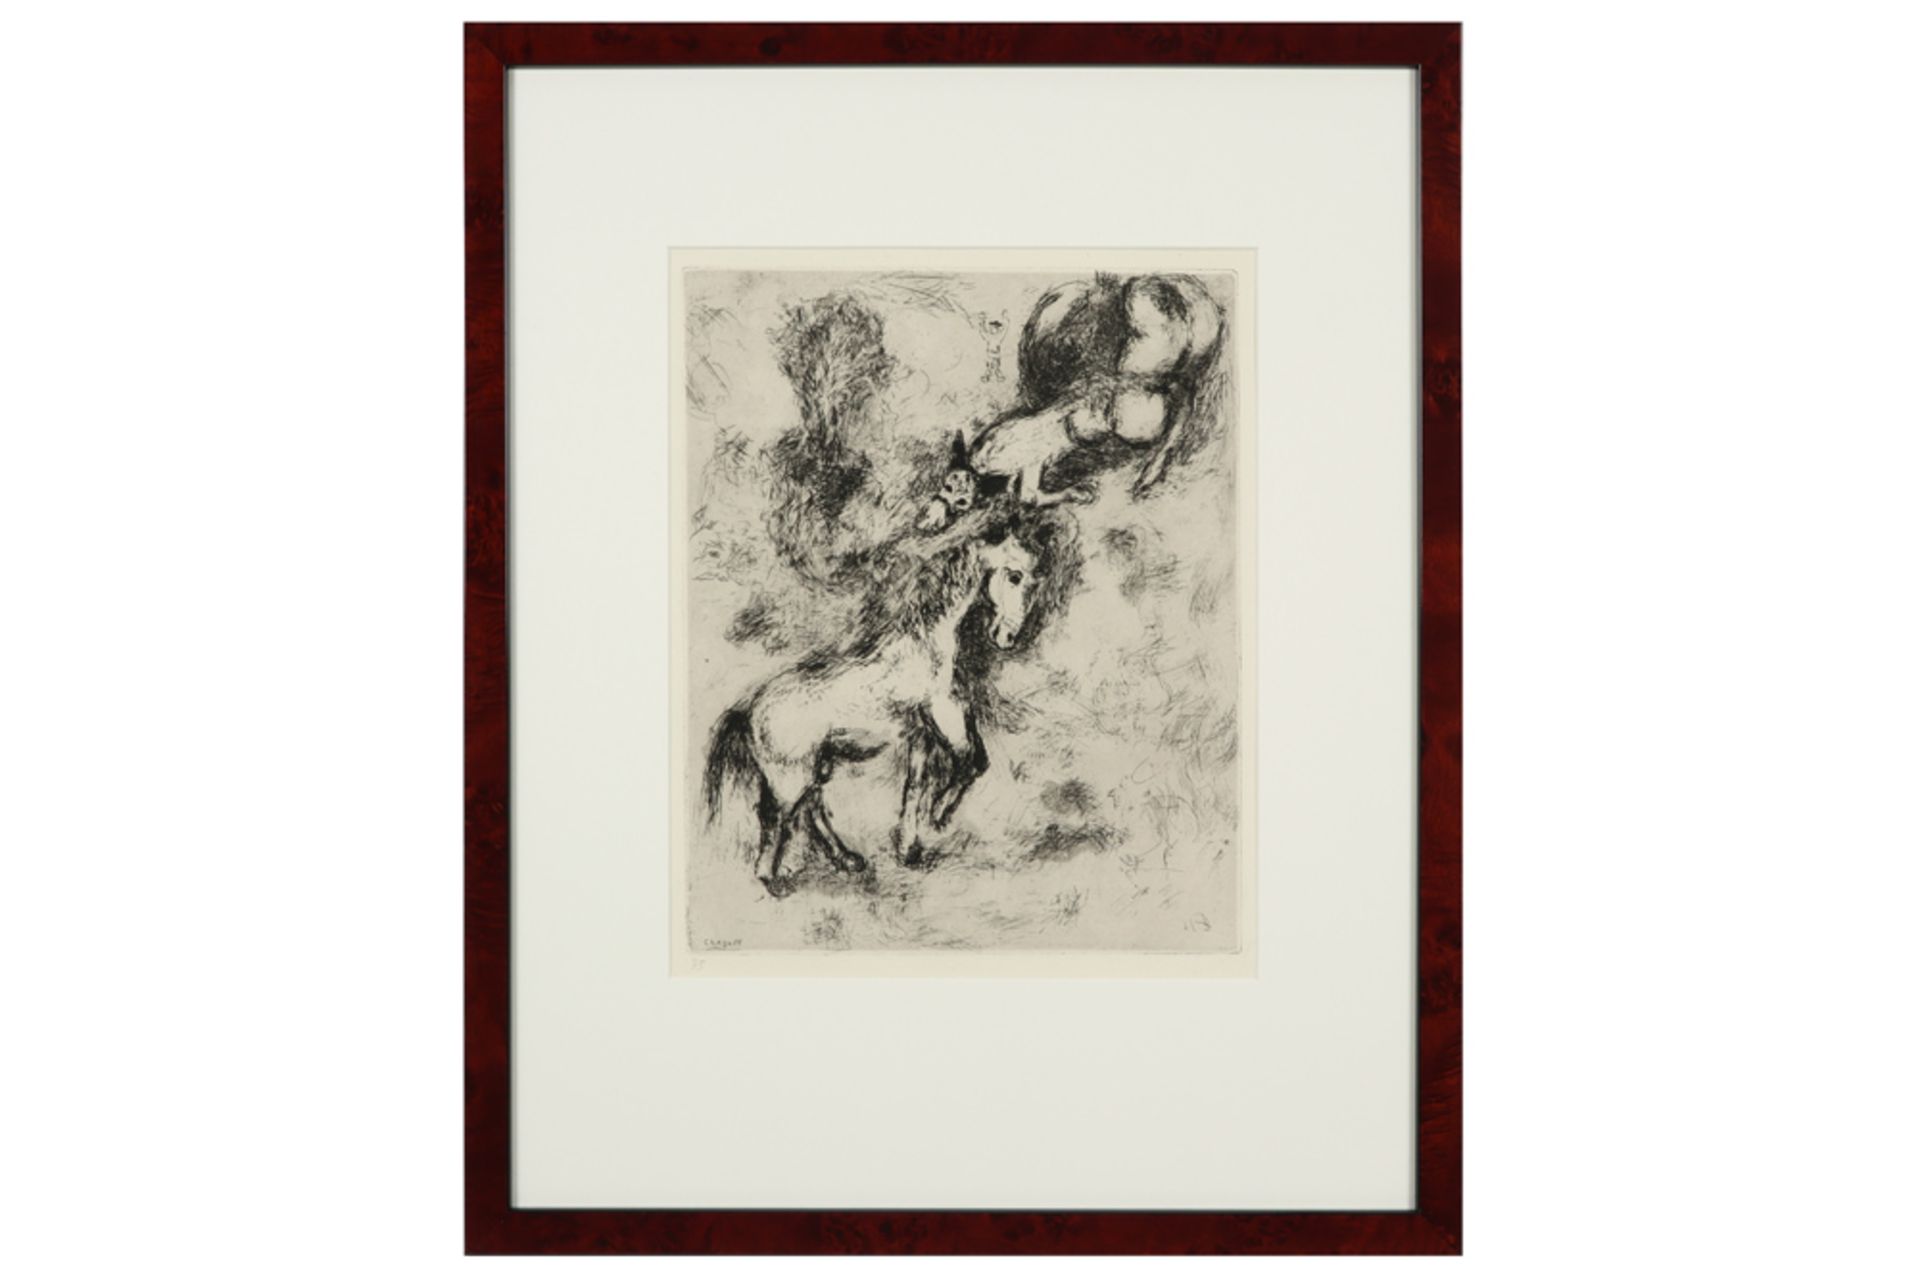 rare Marc Chagall etching (n°35 of 200) from the suite "Fables de Jean de la Fontaine" dd 1952 - - Image 3 of 3